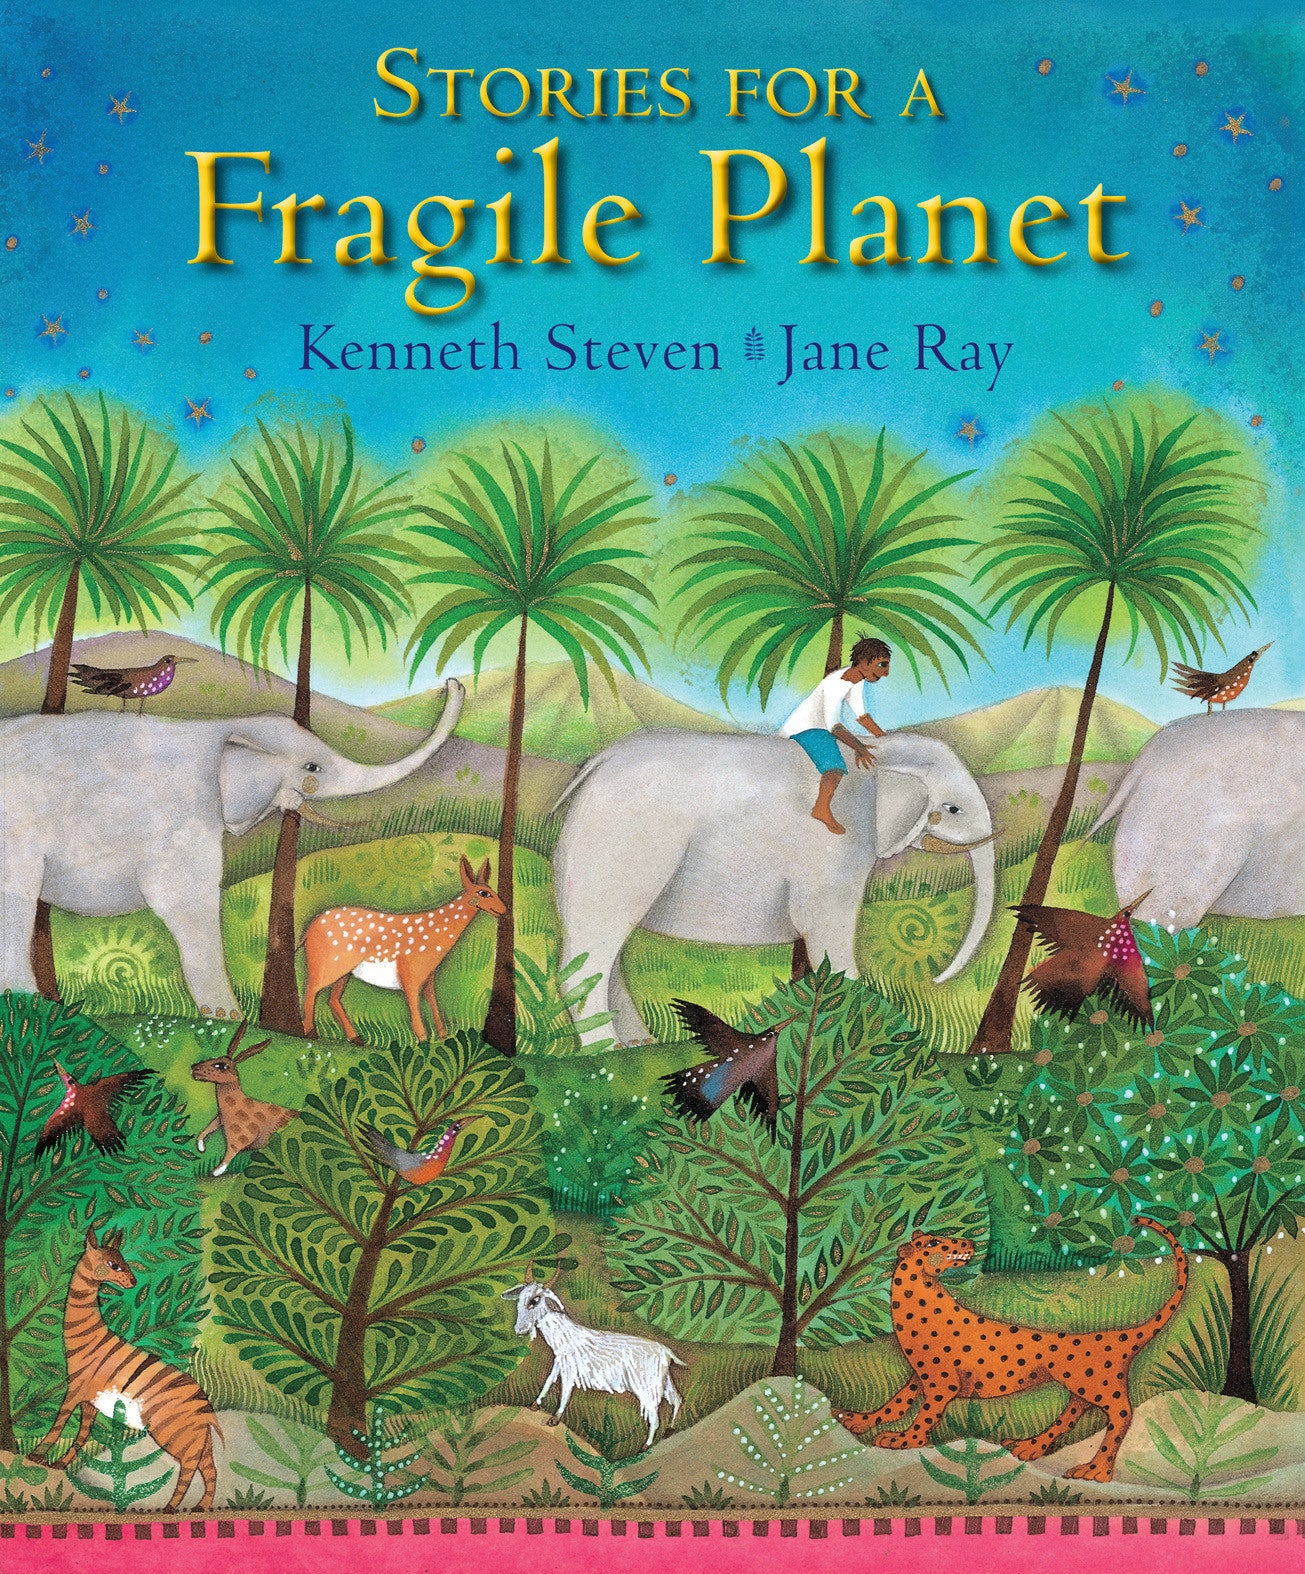 Image of Stories for a Fragile Planet other